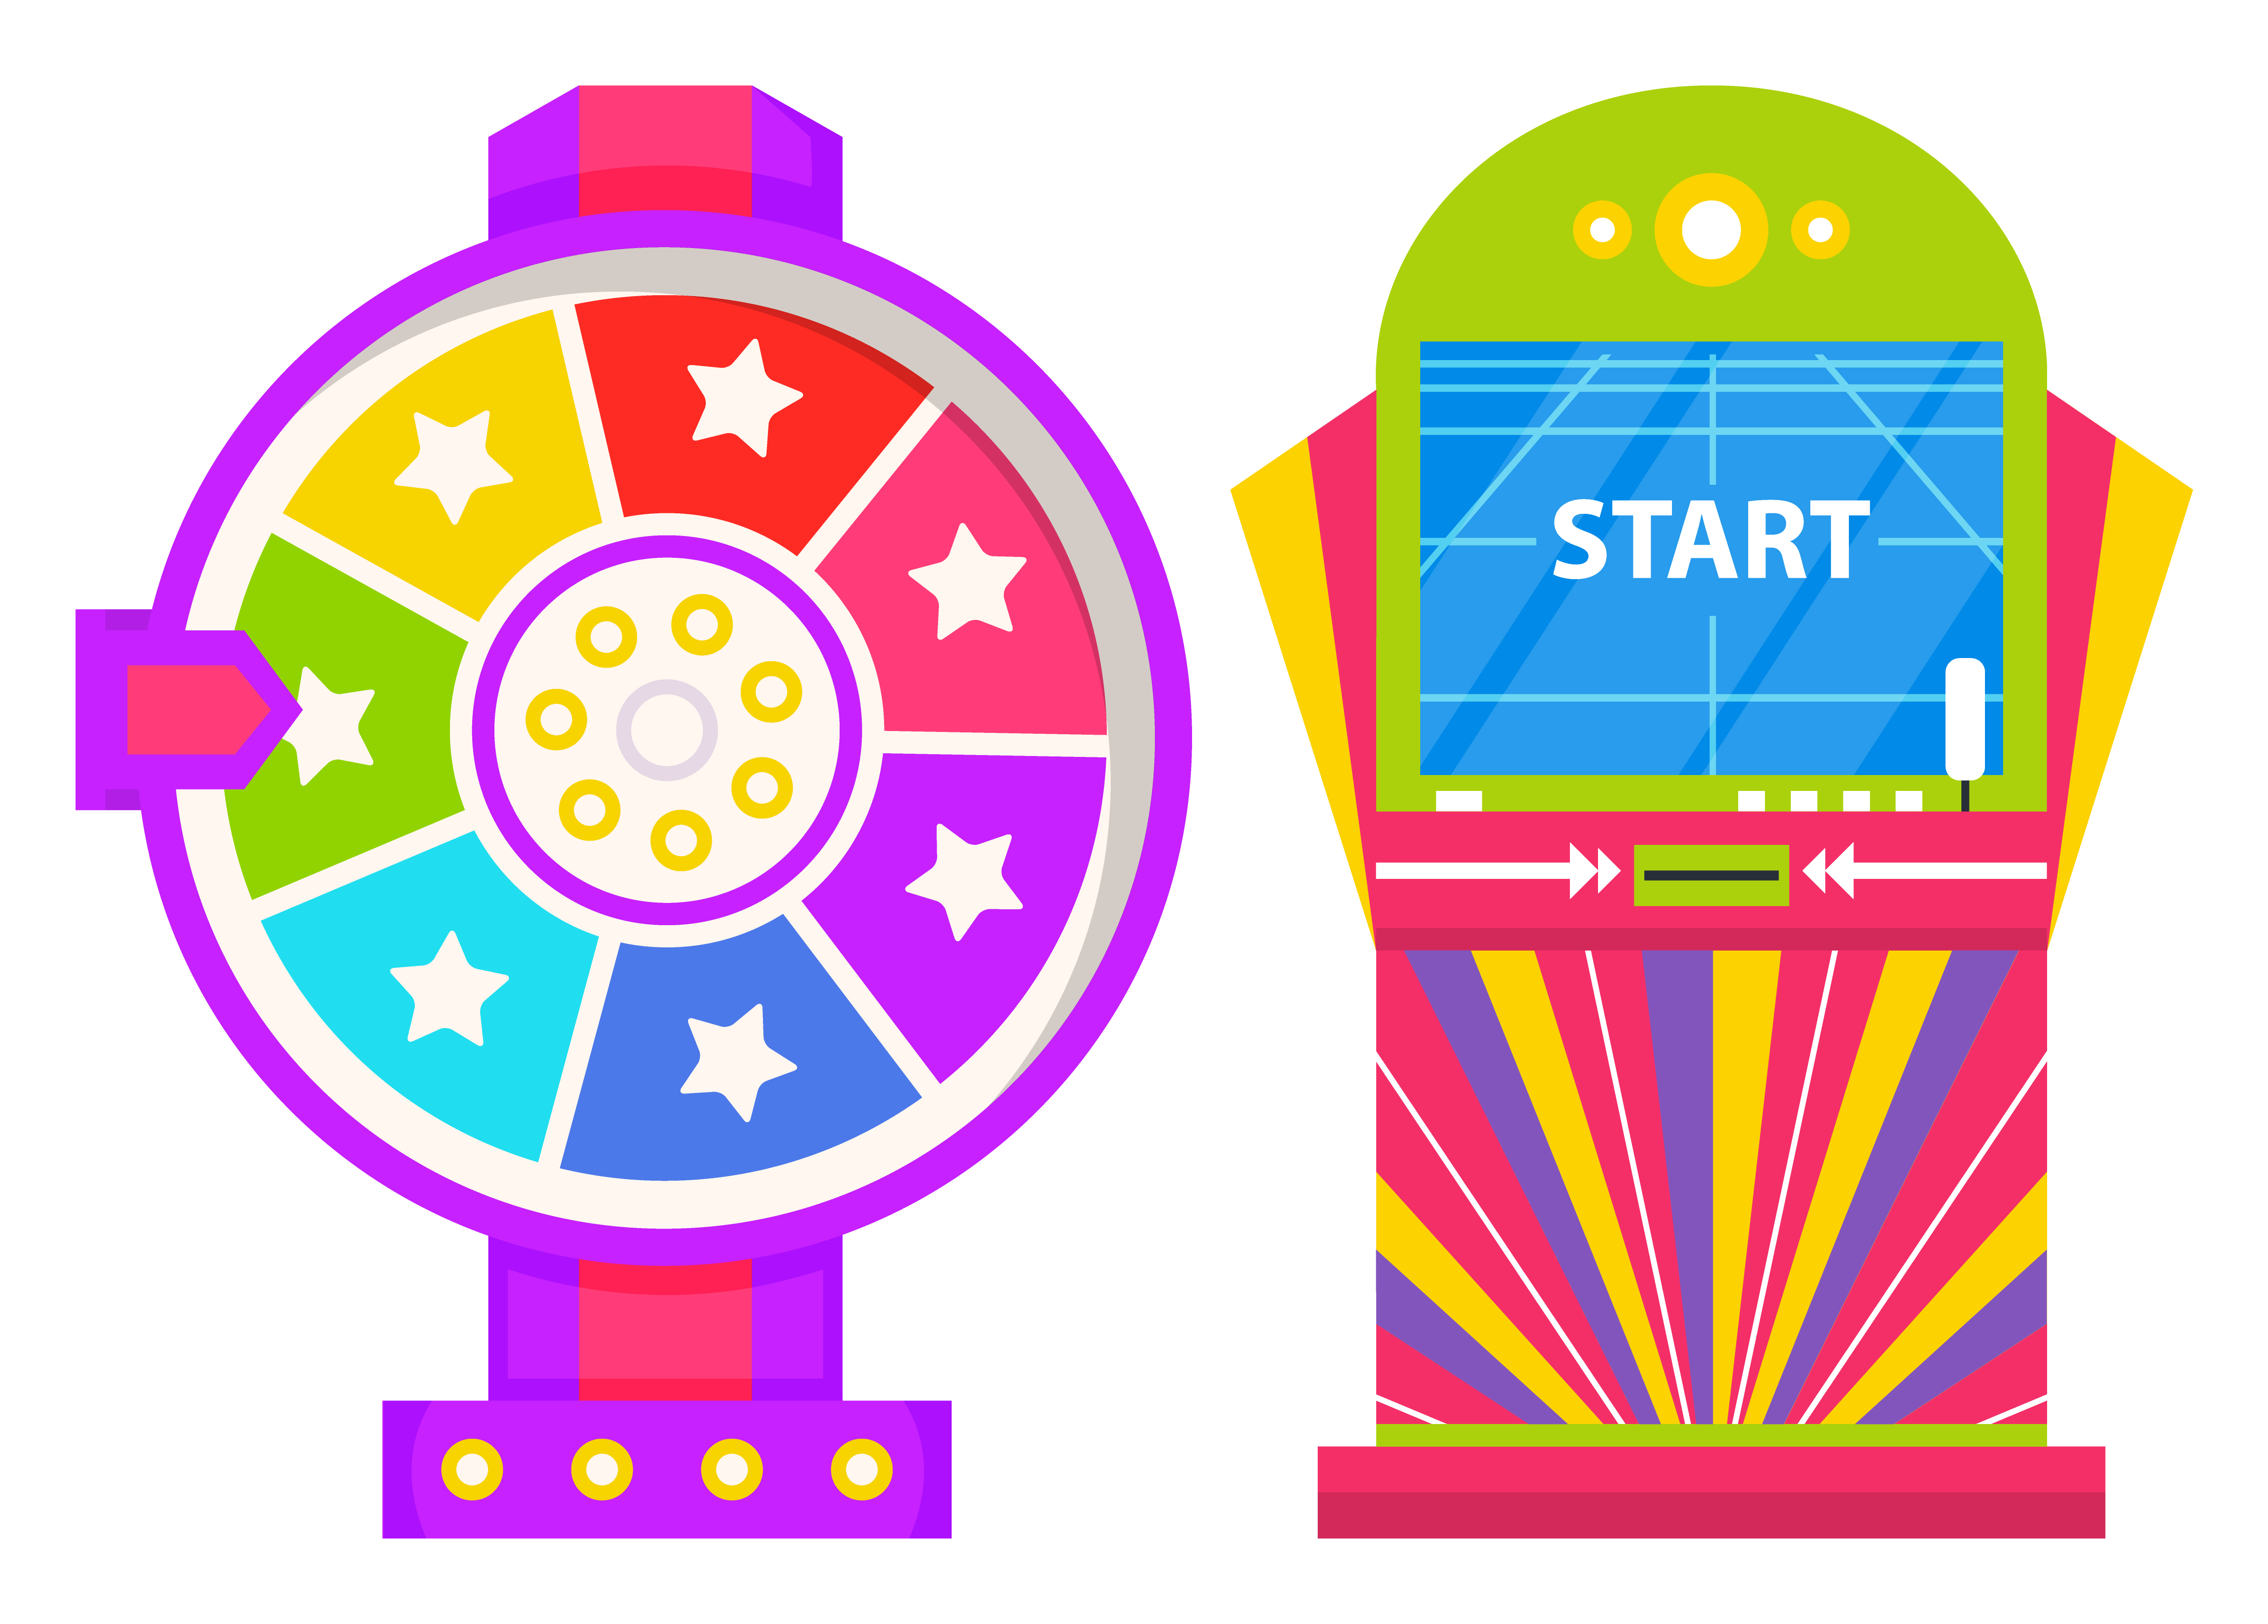 Gambling fortune wheel vector, isolated game machine with screen saying start. Casino online, flat style devices with reward and spirit of competition. Playing on money and winning victorious tokens. Start Playing on Game Machine, Fortune Wheel Set